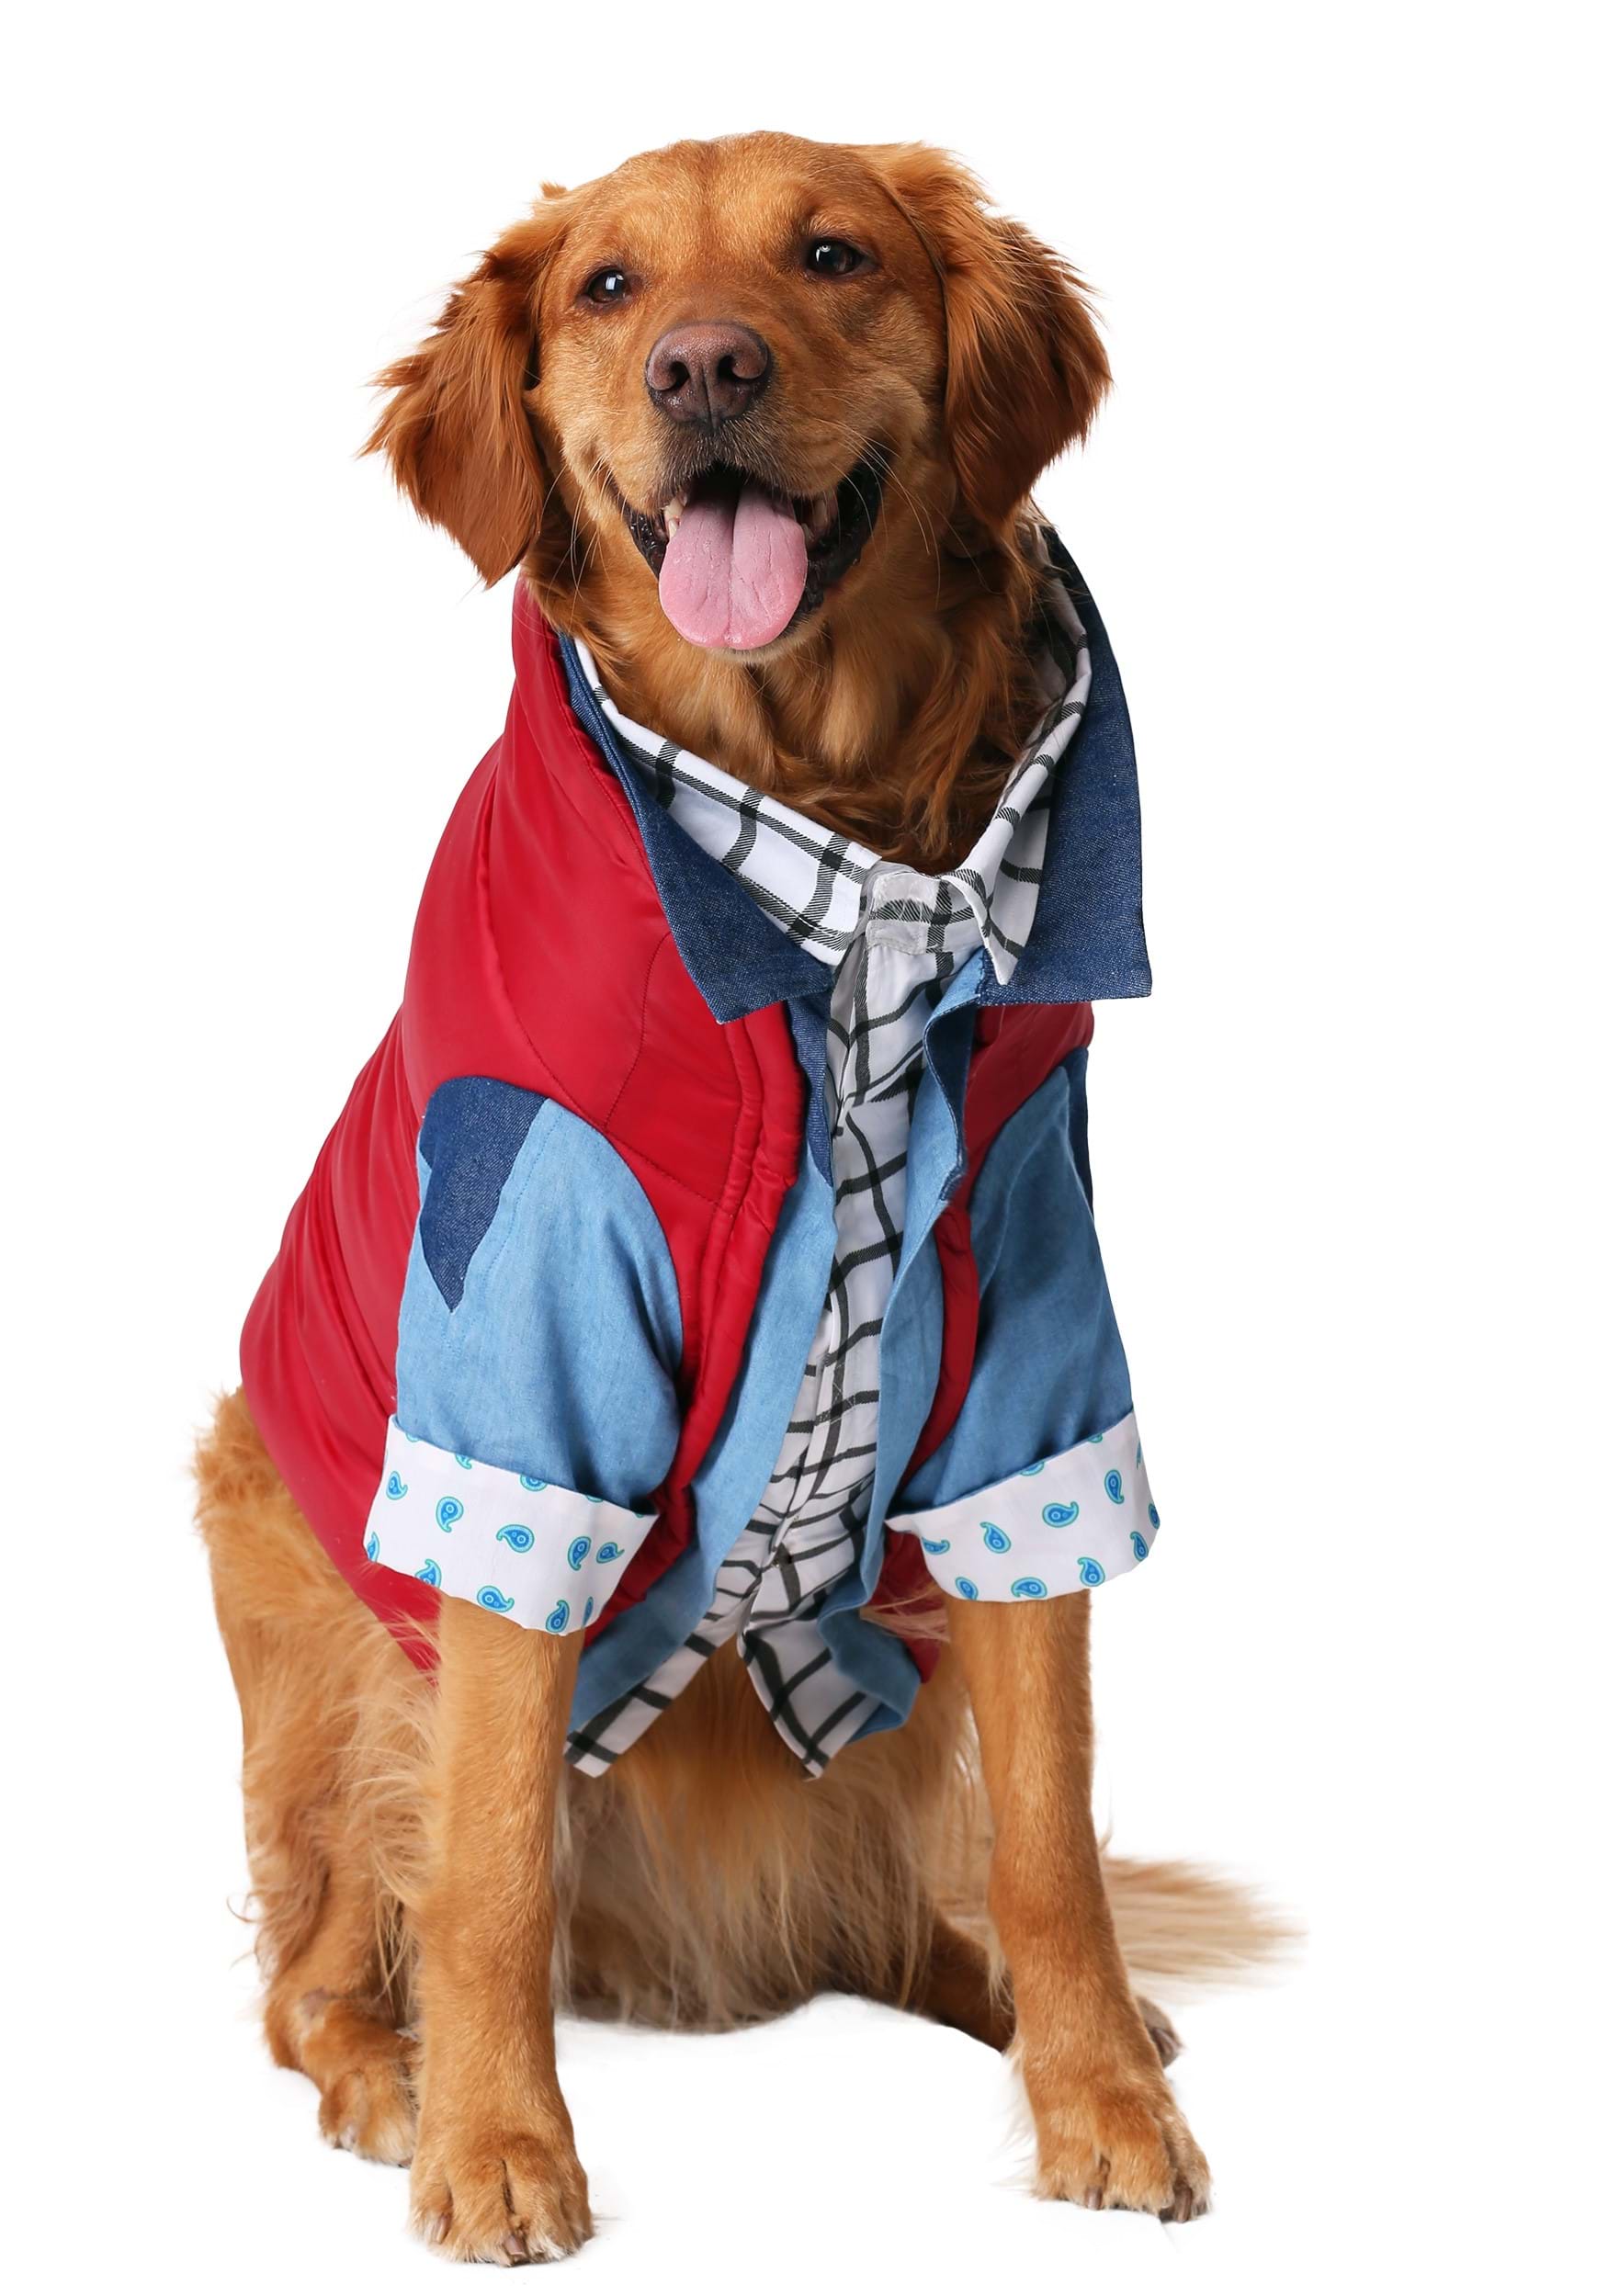 Photos - Fancy Dress FUN Costumes Marty McFly Costume for Dogs Blue/Red/White FUN6623